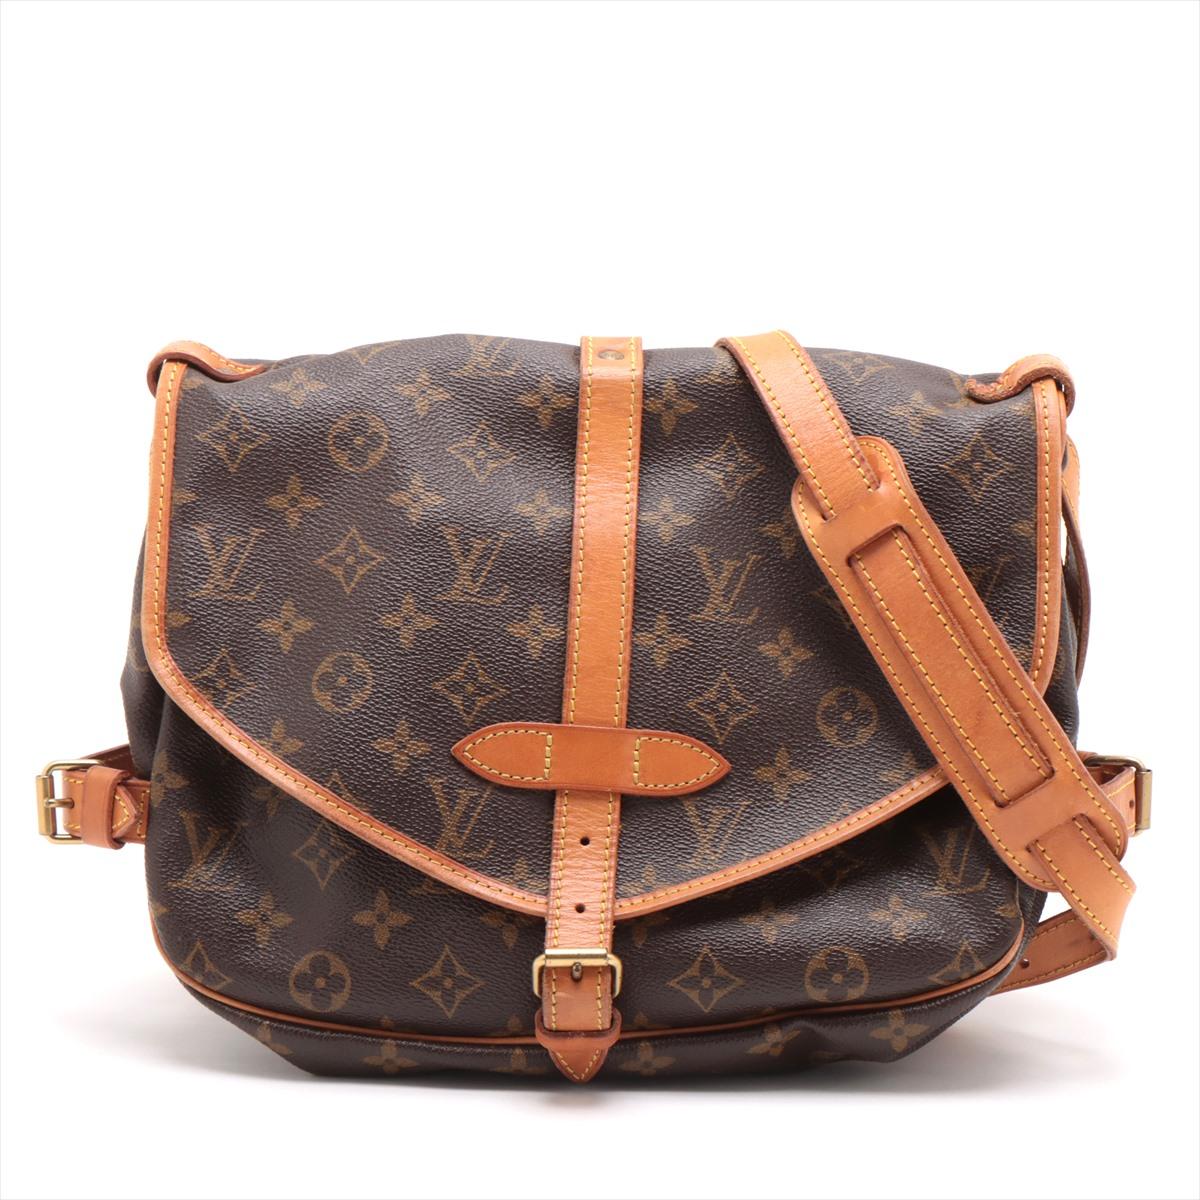 The Louis Vuitton Monogram Saumur 30 is a classic and versatile handbag that embodies the brand's iconic Monogram canvas design. The crossbody bag features the instantly recognizable LV monogram pattern in rich brown hues, exuding a sense of